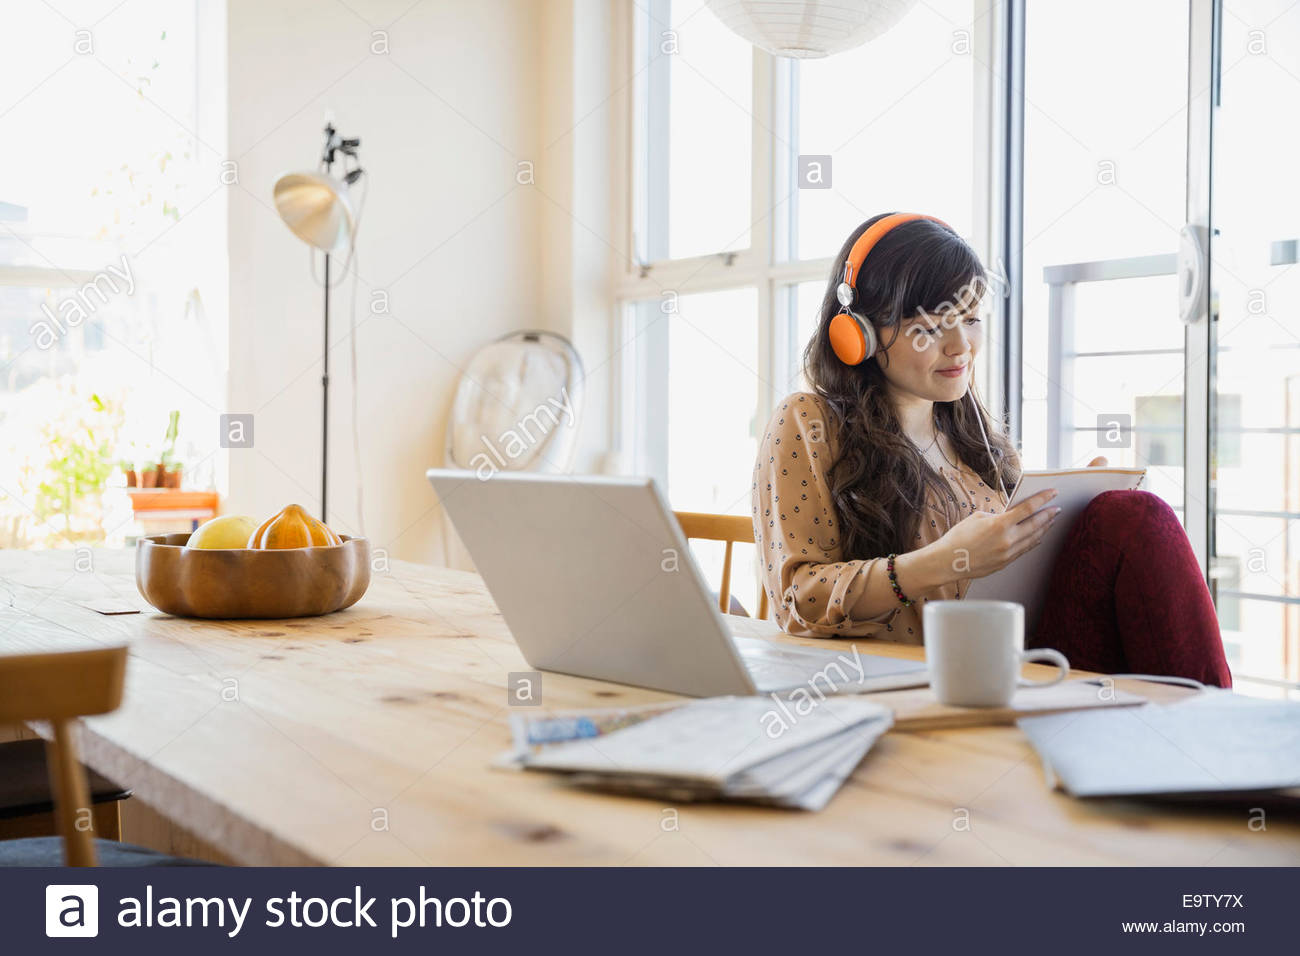 Woman with headphones and notebook at laptop Stock Photo